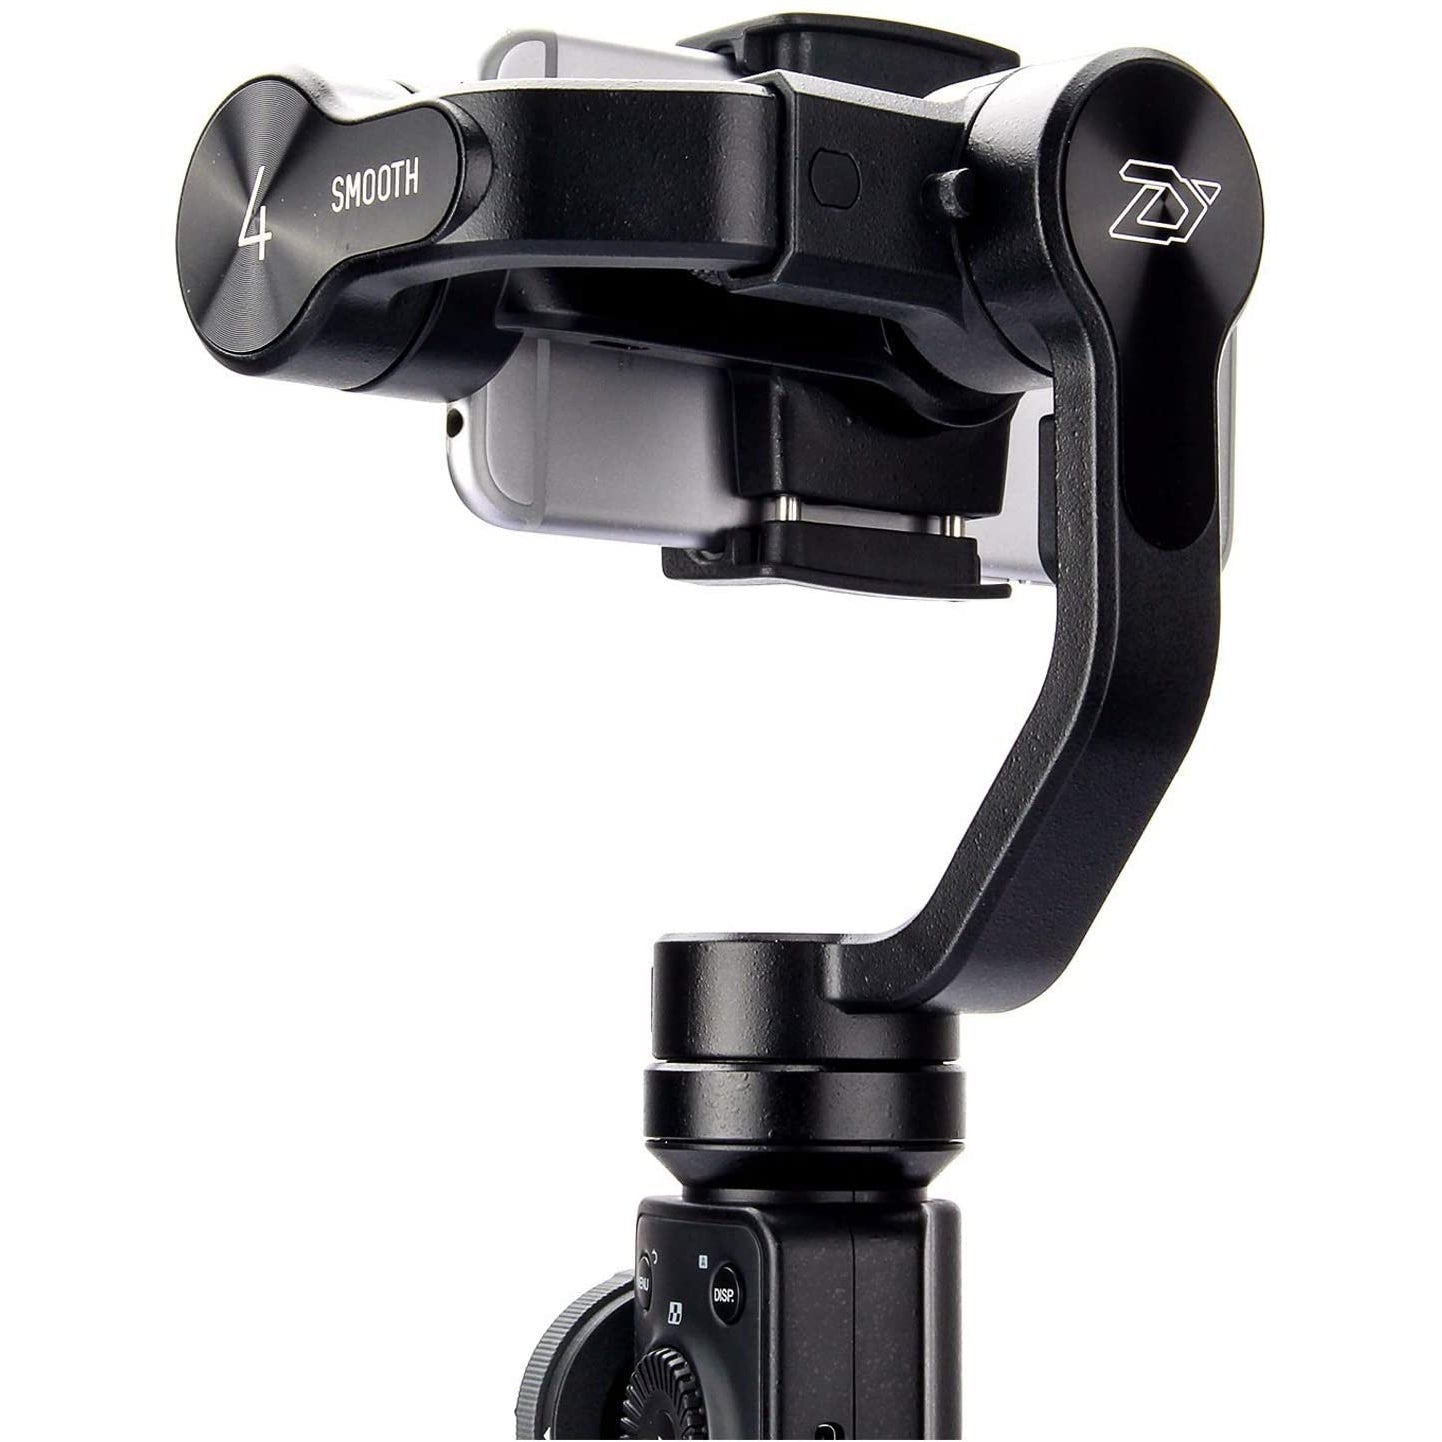 Zhiyun Smooth 4 Professional Gimbal Stabilizer for Smartphones with Grip Tripod